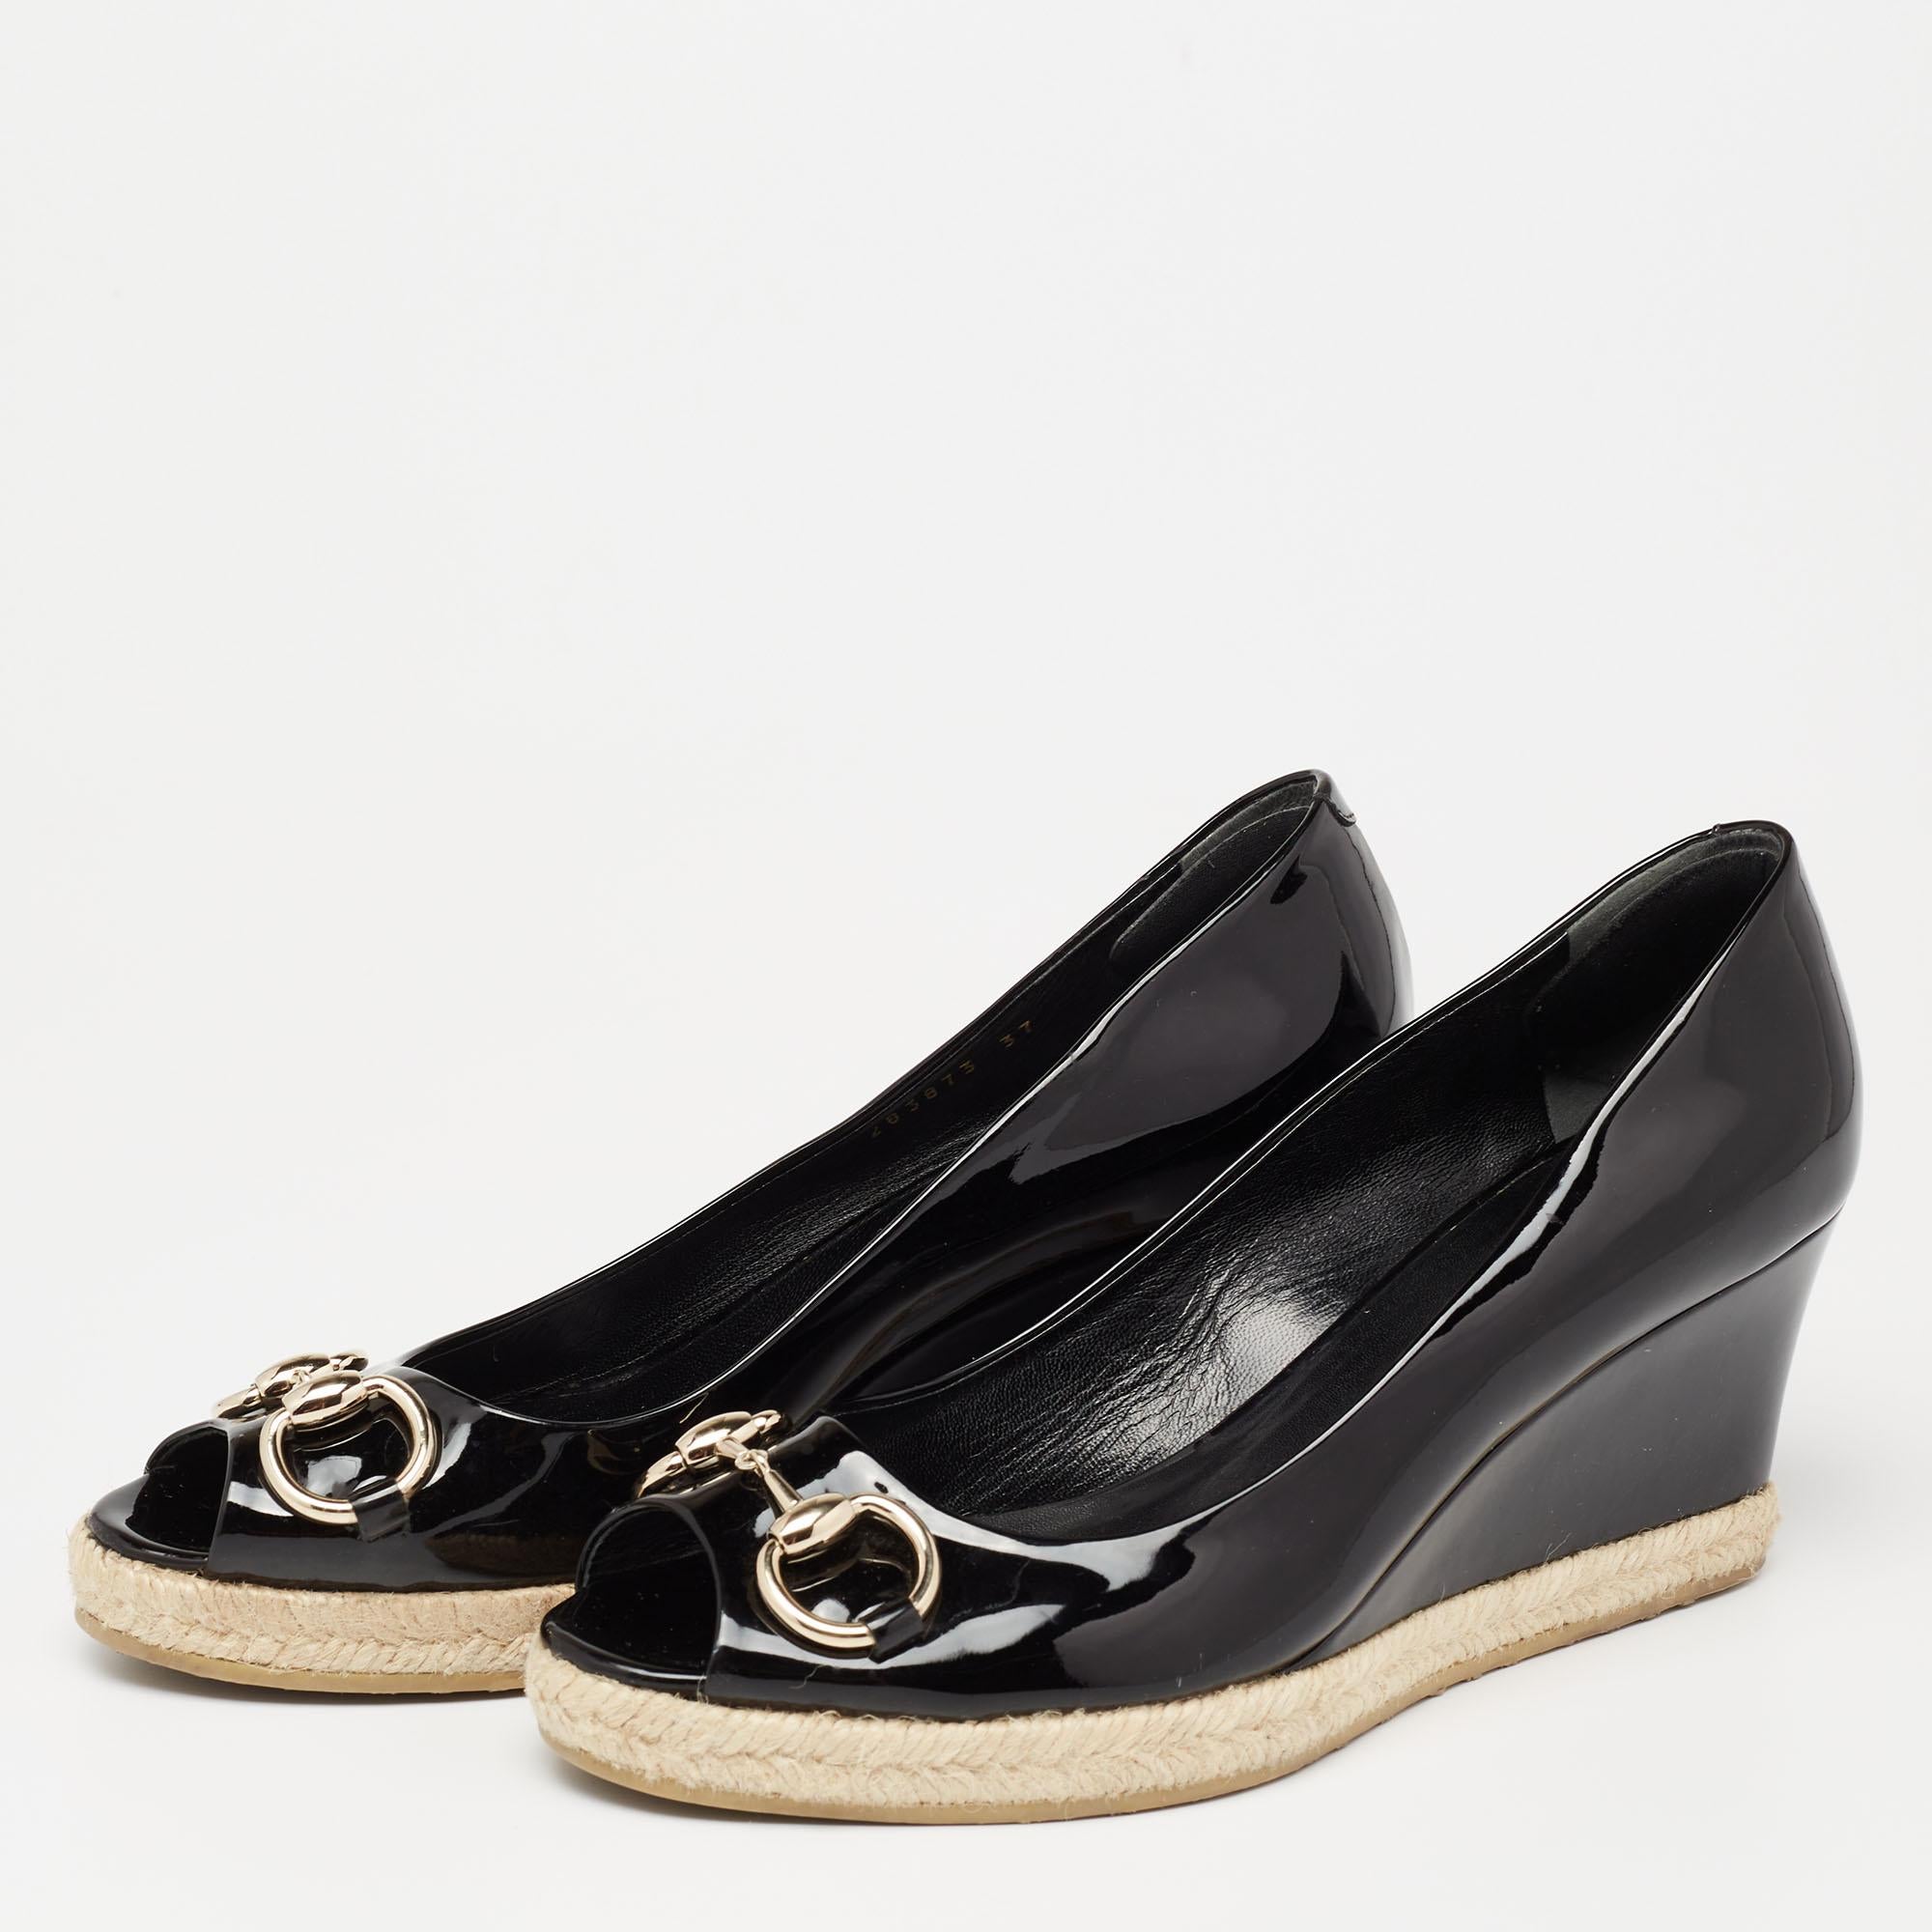 Gucci's timeless aesthetic and stellar craftsmanship in shoemaking is evident in these stunning pumps. Crafted from patent leather in a black shade, they are topped with the signature Horsebit accent and mounted on wedge heels for the right amount